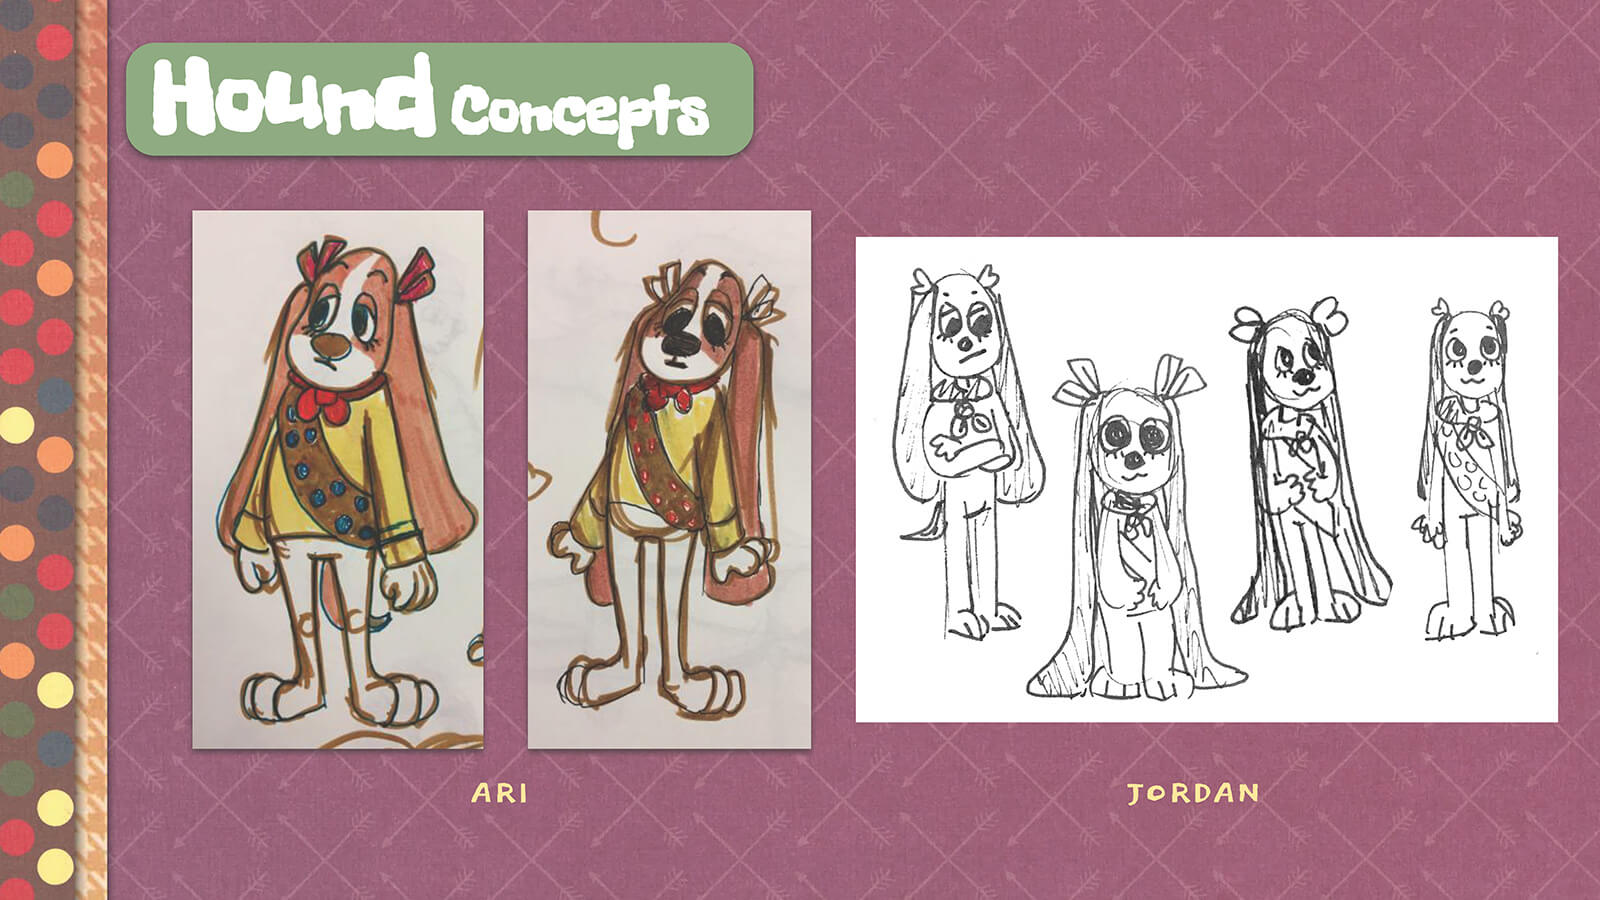 Concept art and sketches of the character Hound.